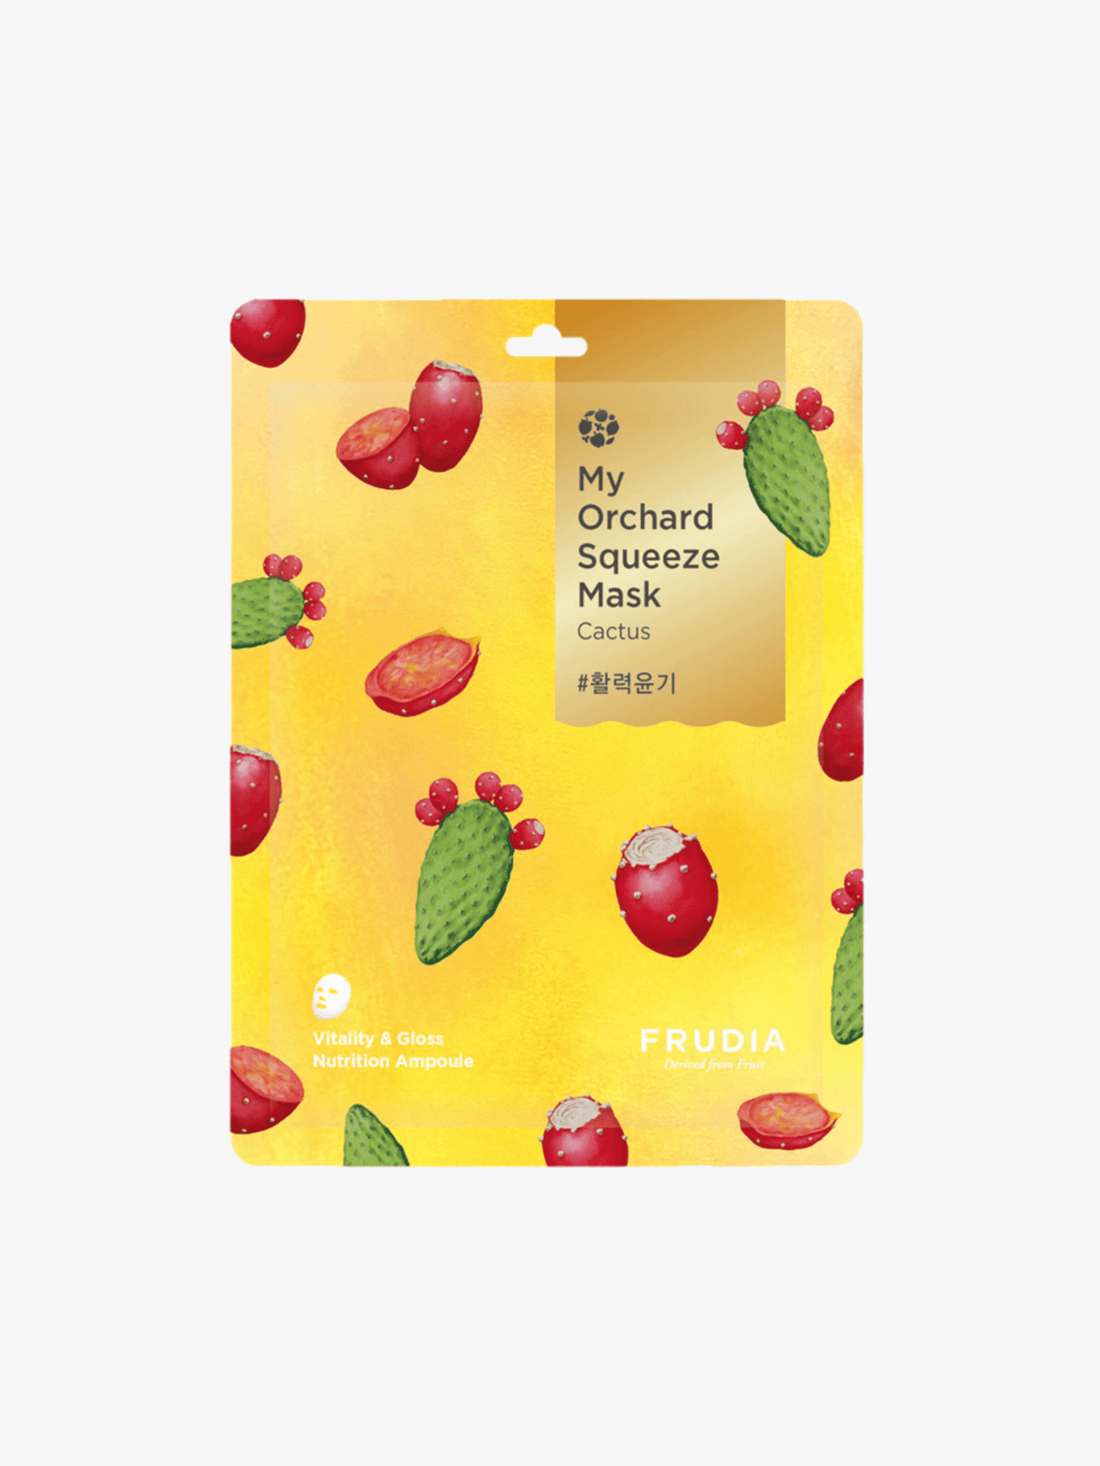 FRUDIA - Mask - My Orchard Squeeze Mask Cactus